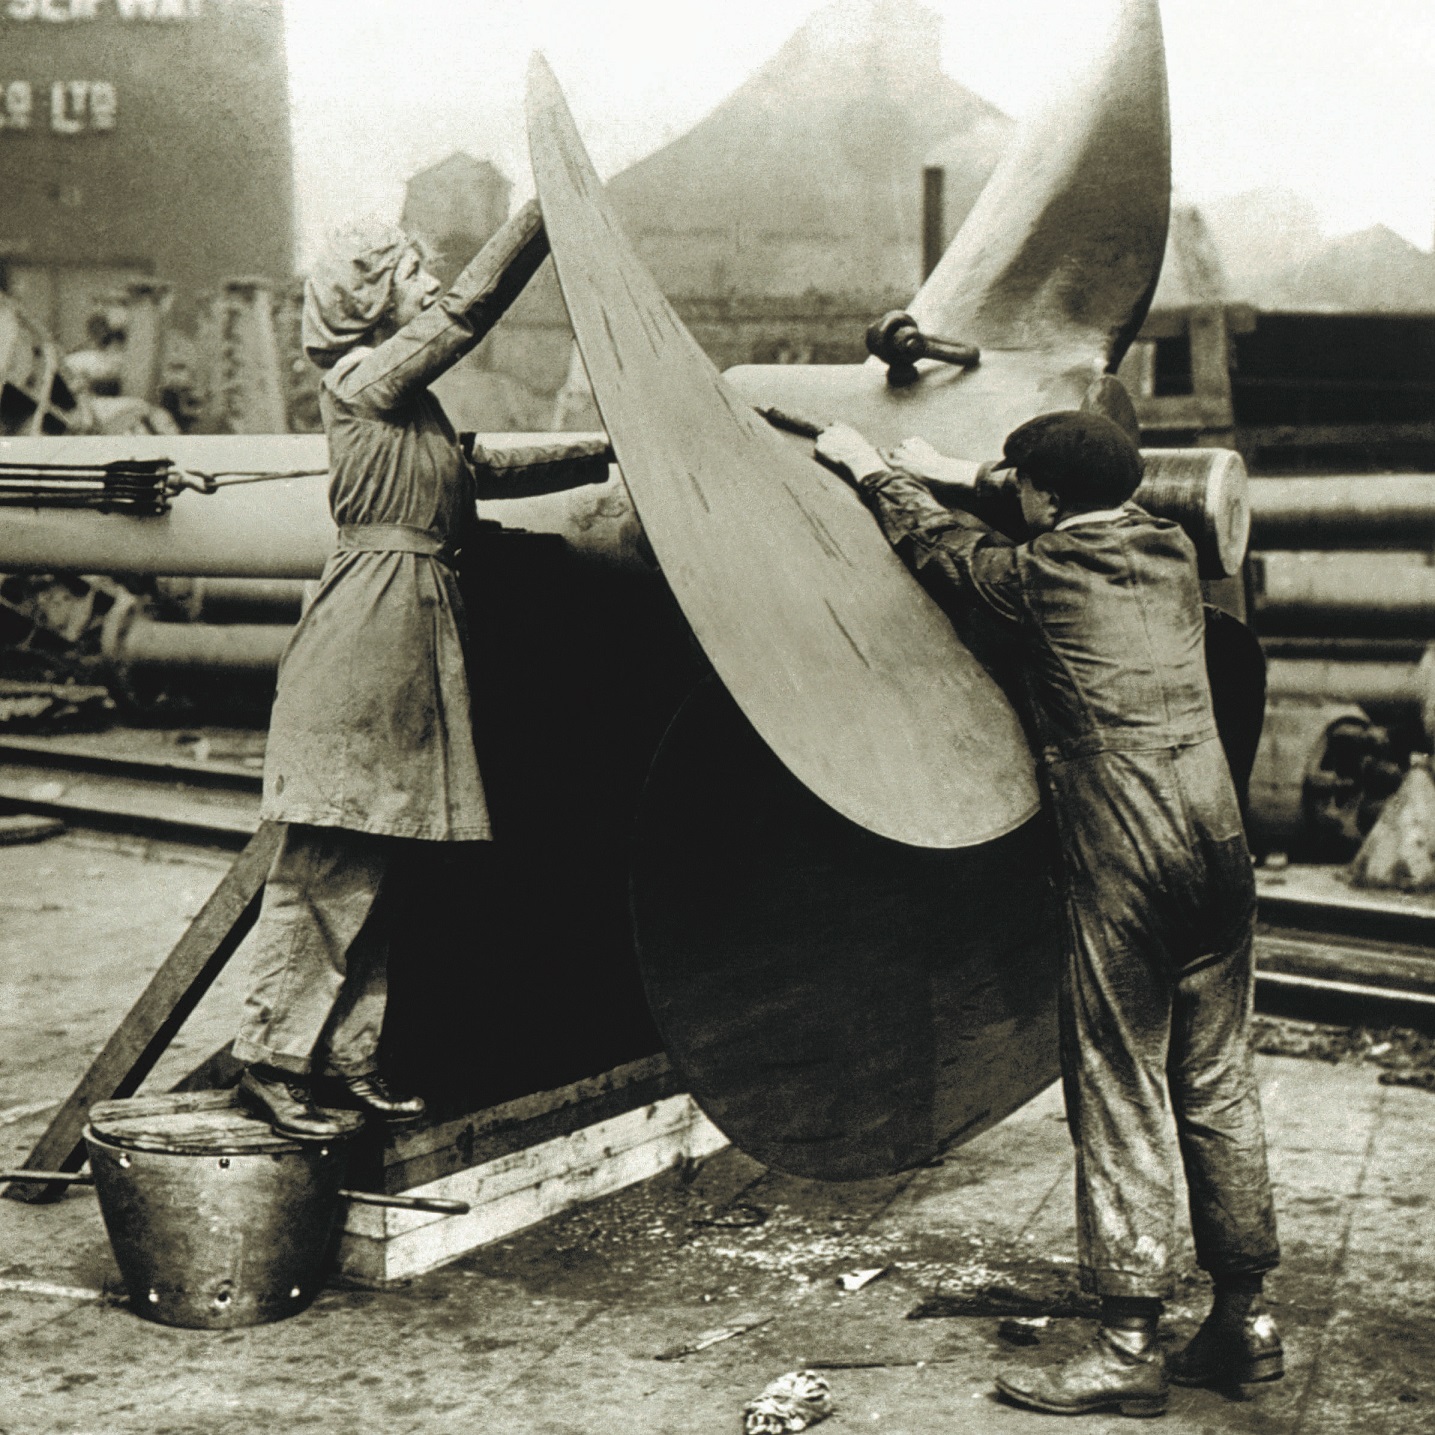 A black and white archive photo showing two women working on a large ship part.